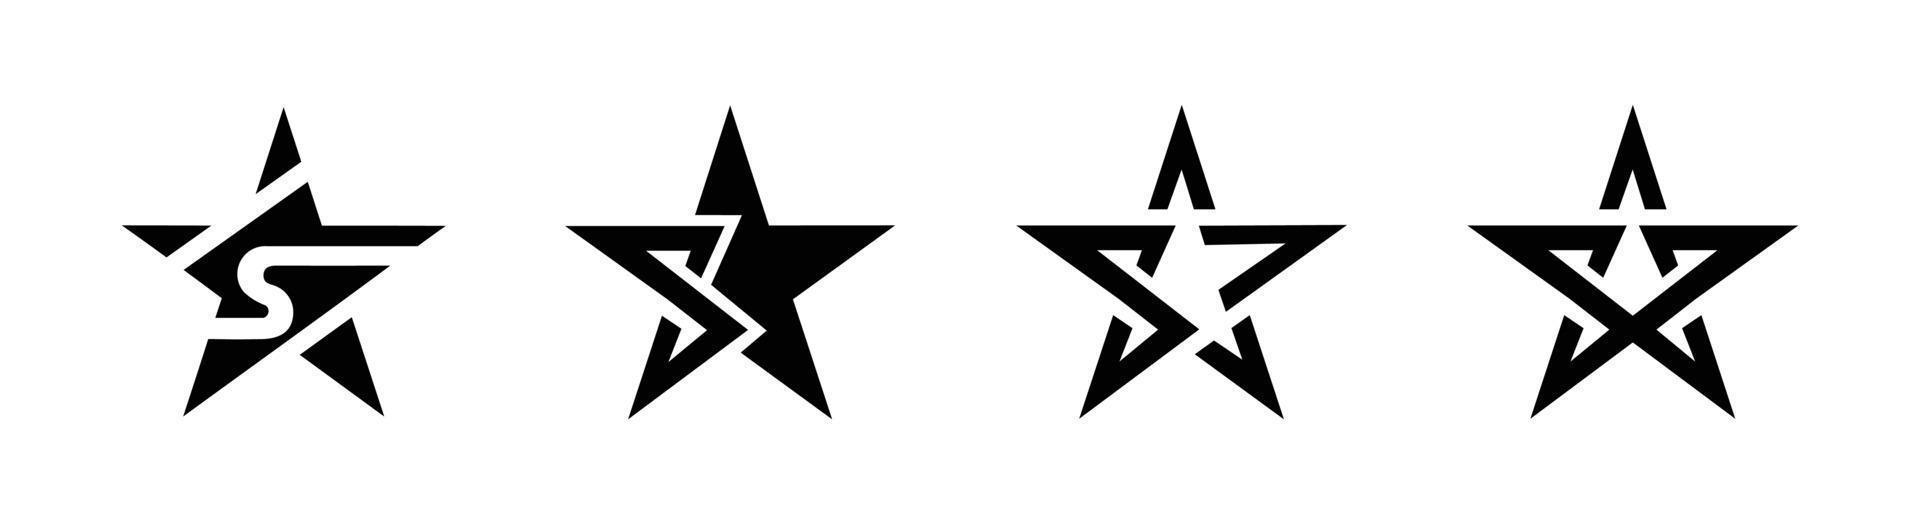 Star Logo Template vector,Star vector icons Set of symbols isolated.